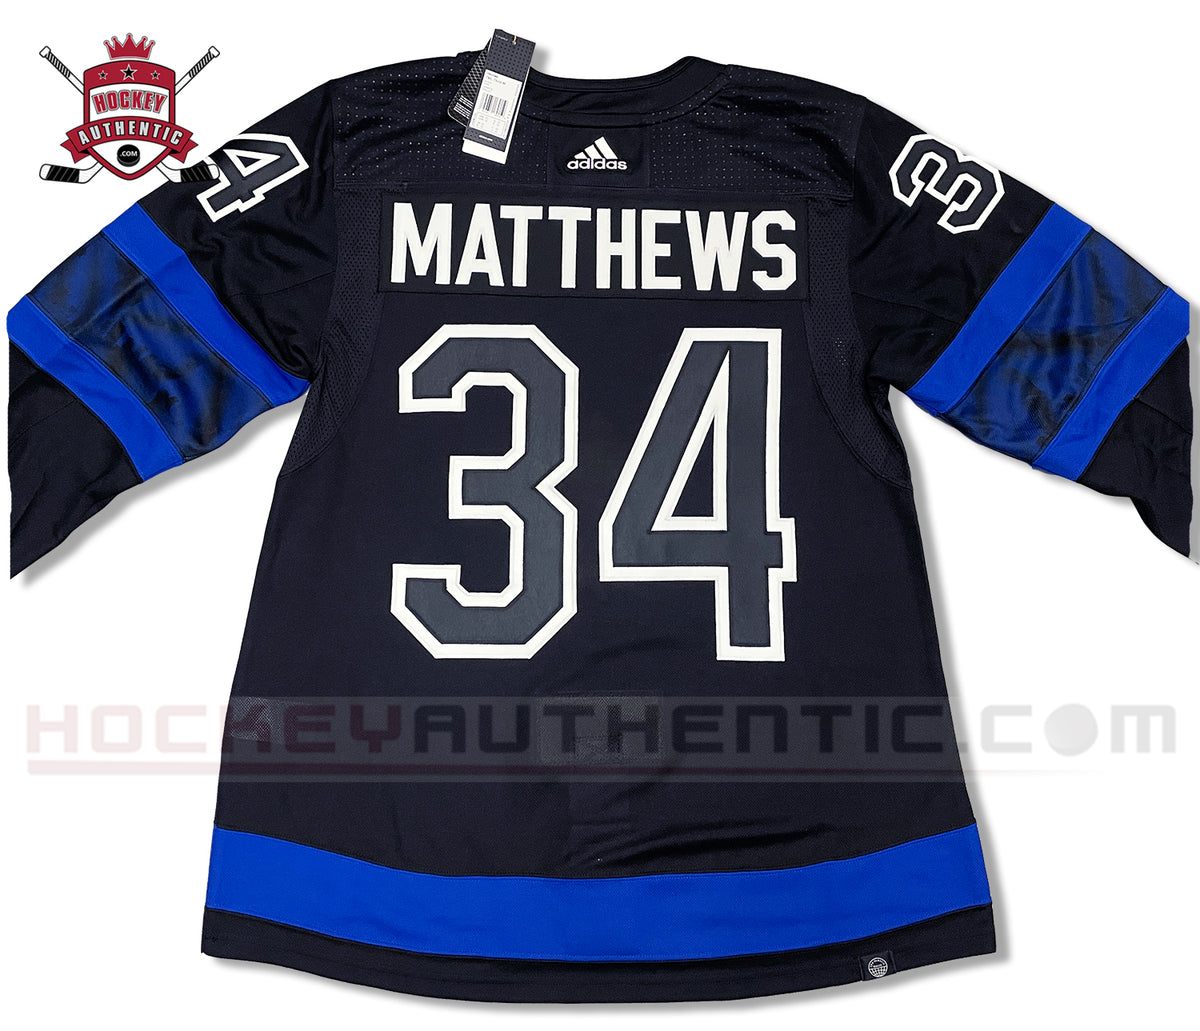 NHL on X: These @MapleLeafs x @drewhouse reversible jerseys are